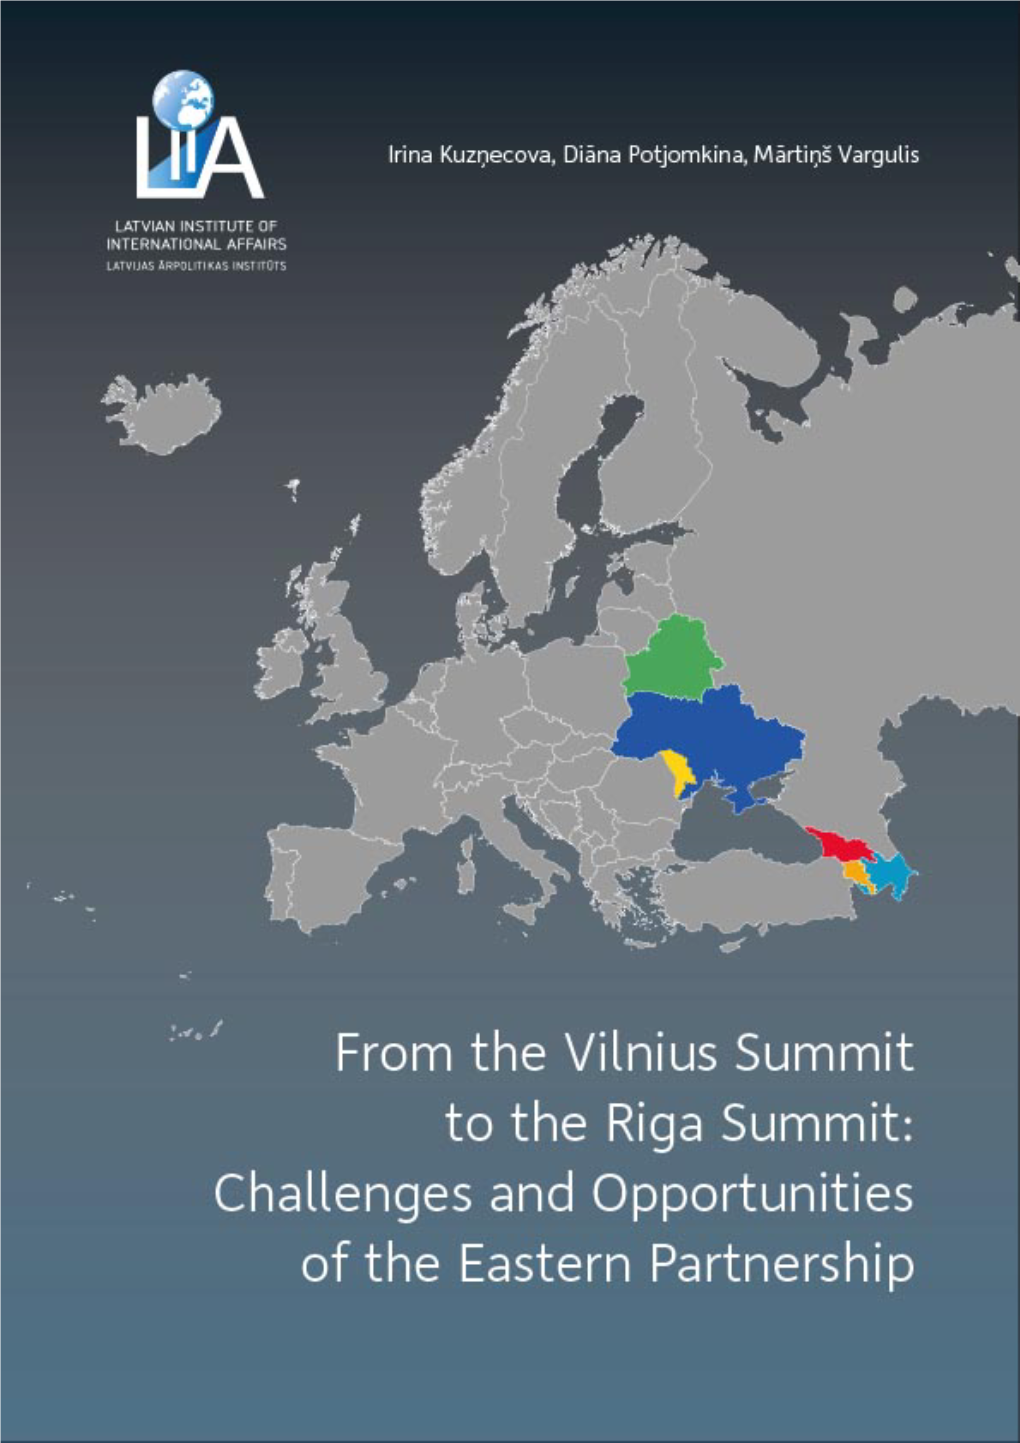 From the Vilnius Summit to the Riga Summit: Challenges and Opporopportunitiestunities of the Eastern Partnership